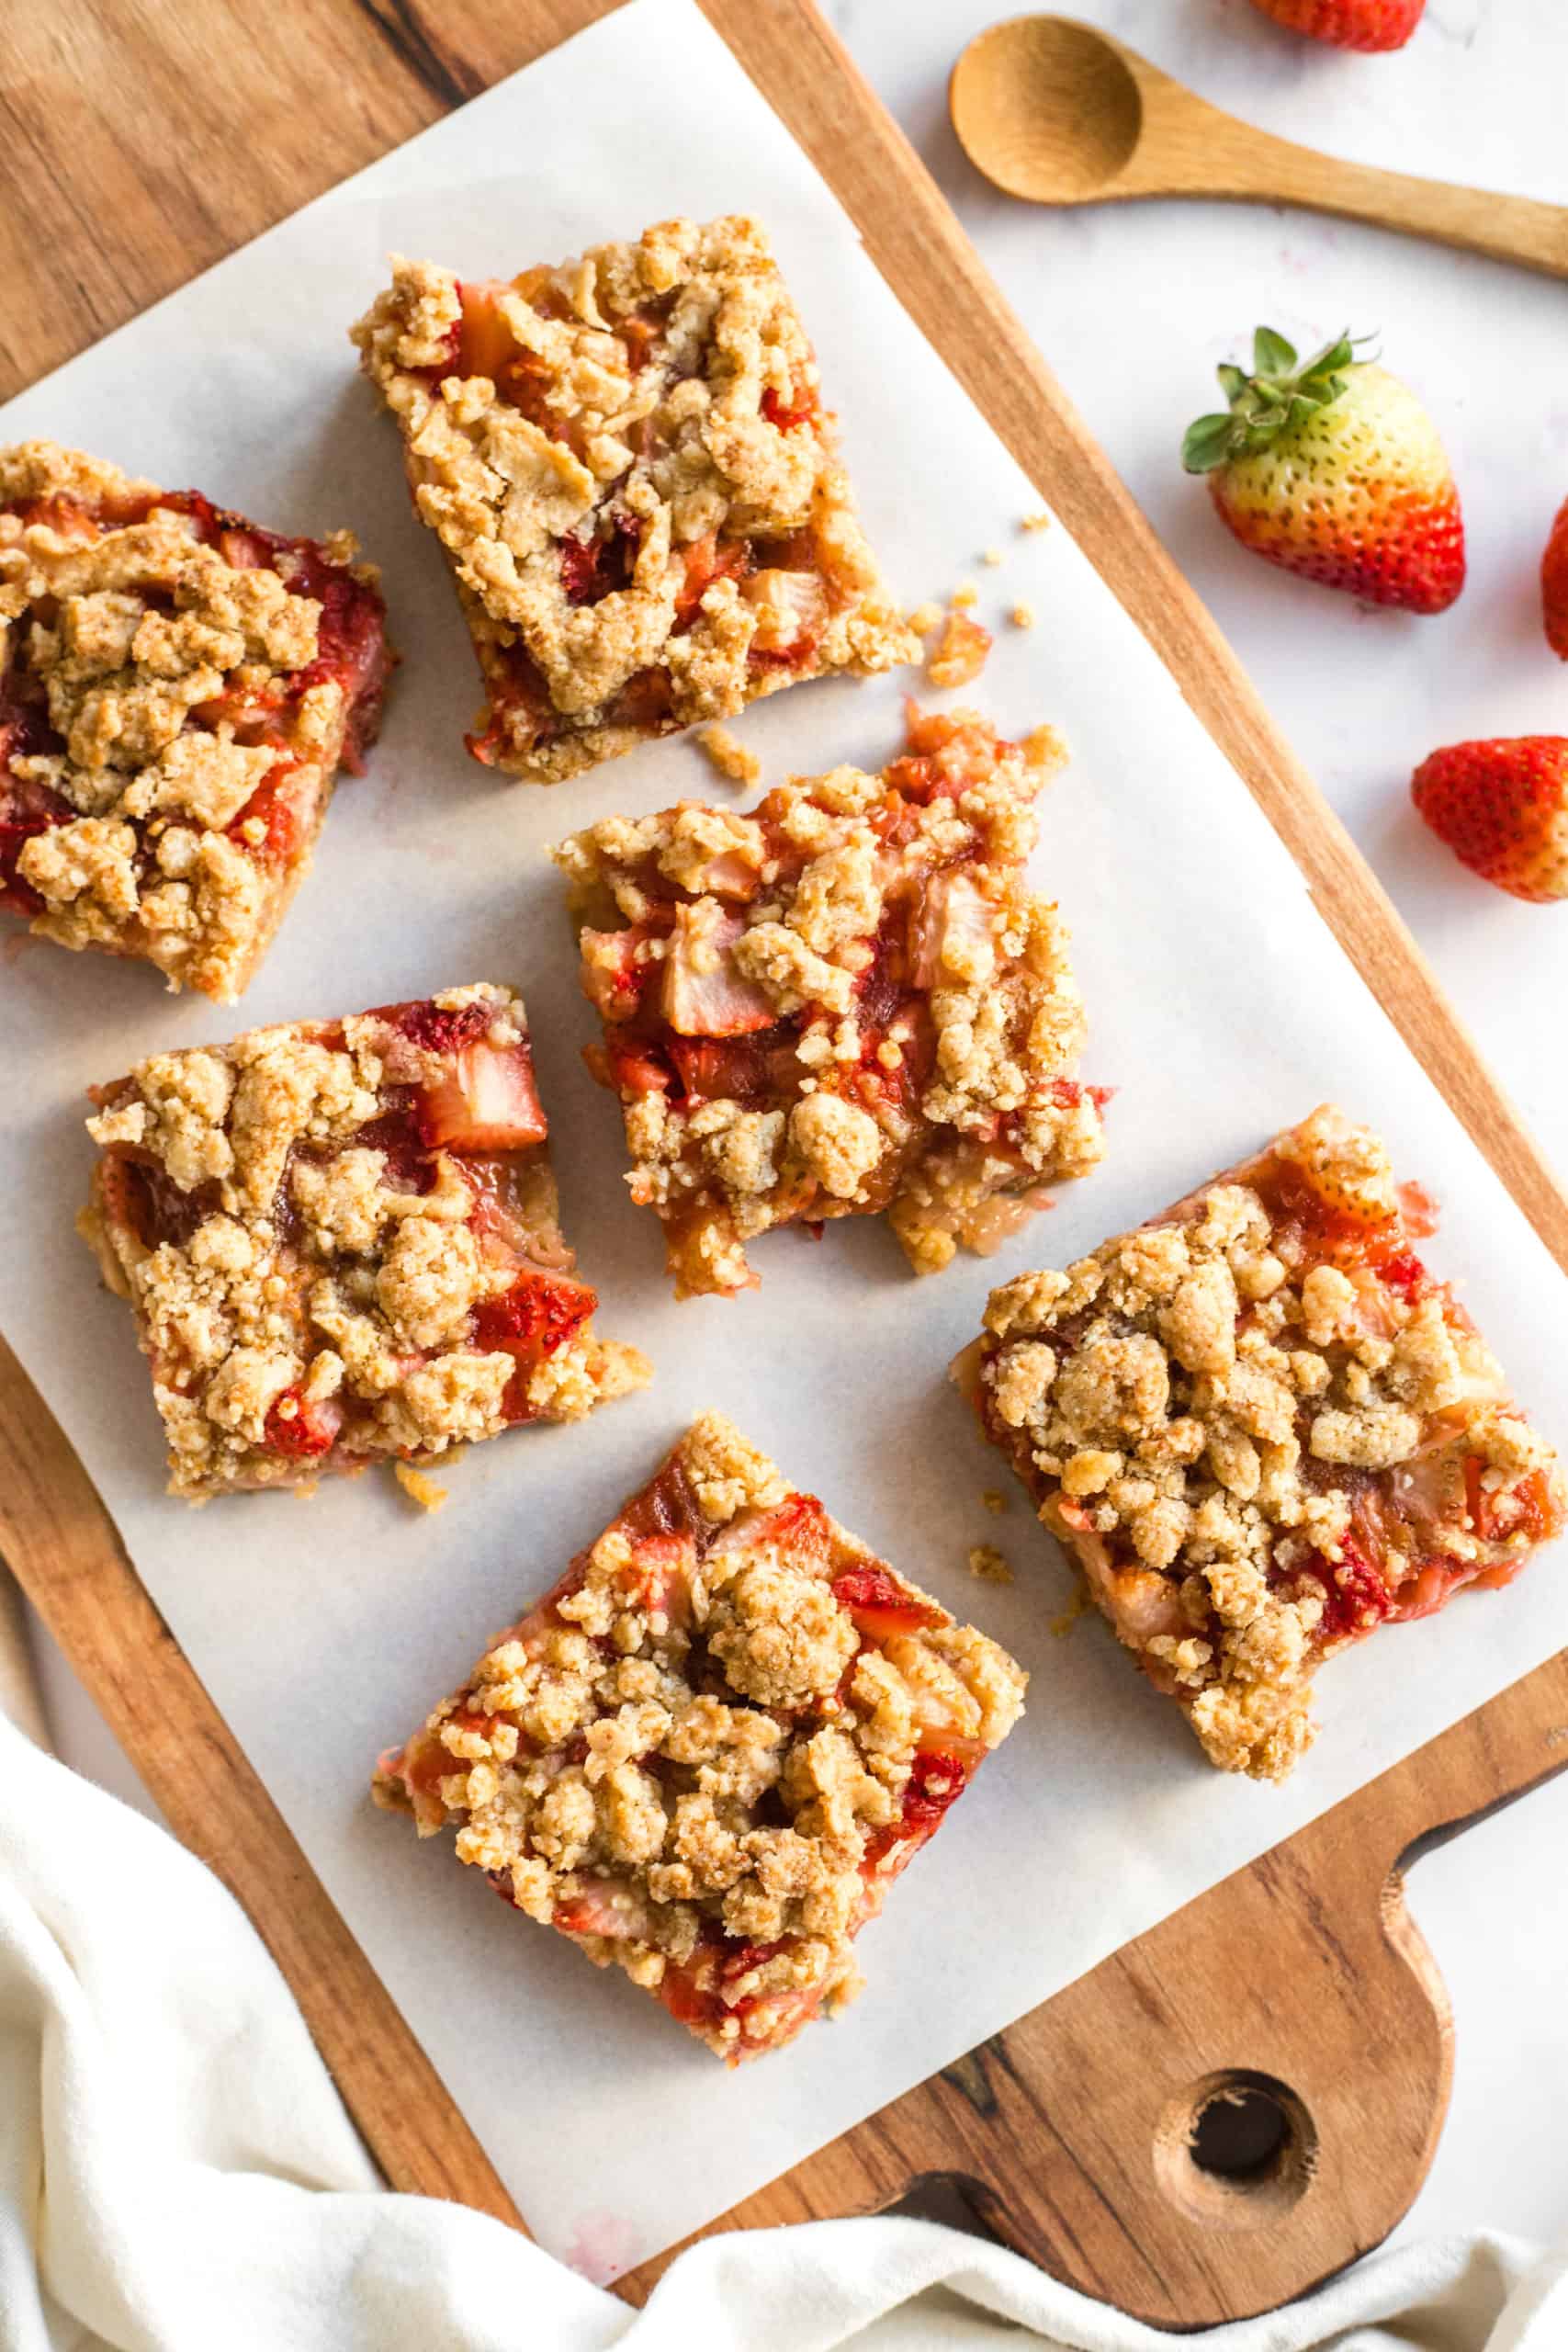 gluten-free strawberry crumble bars on a wooden board.